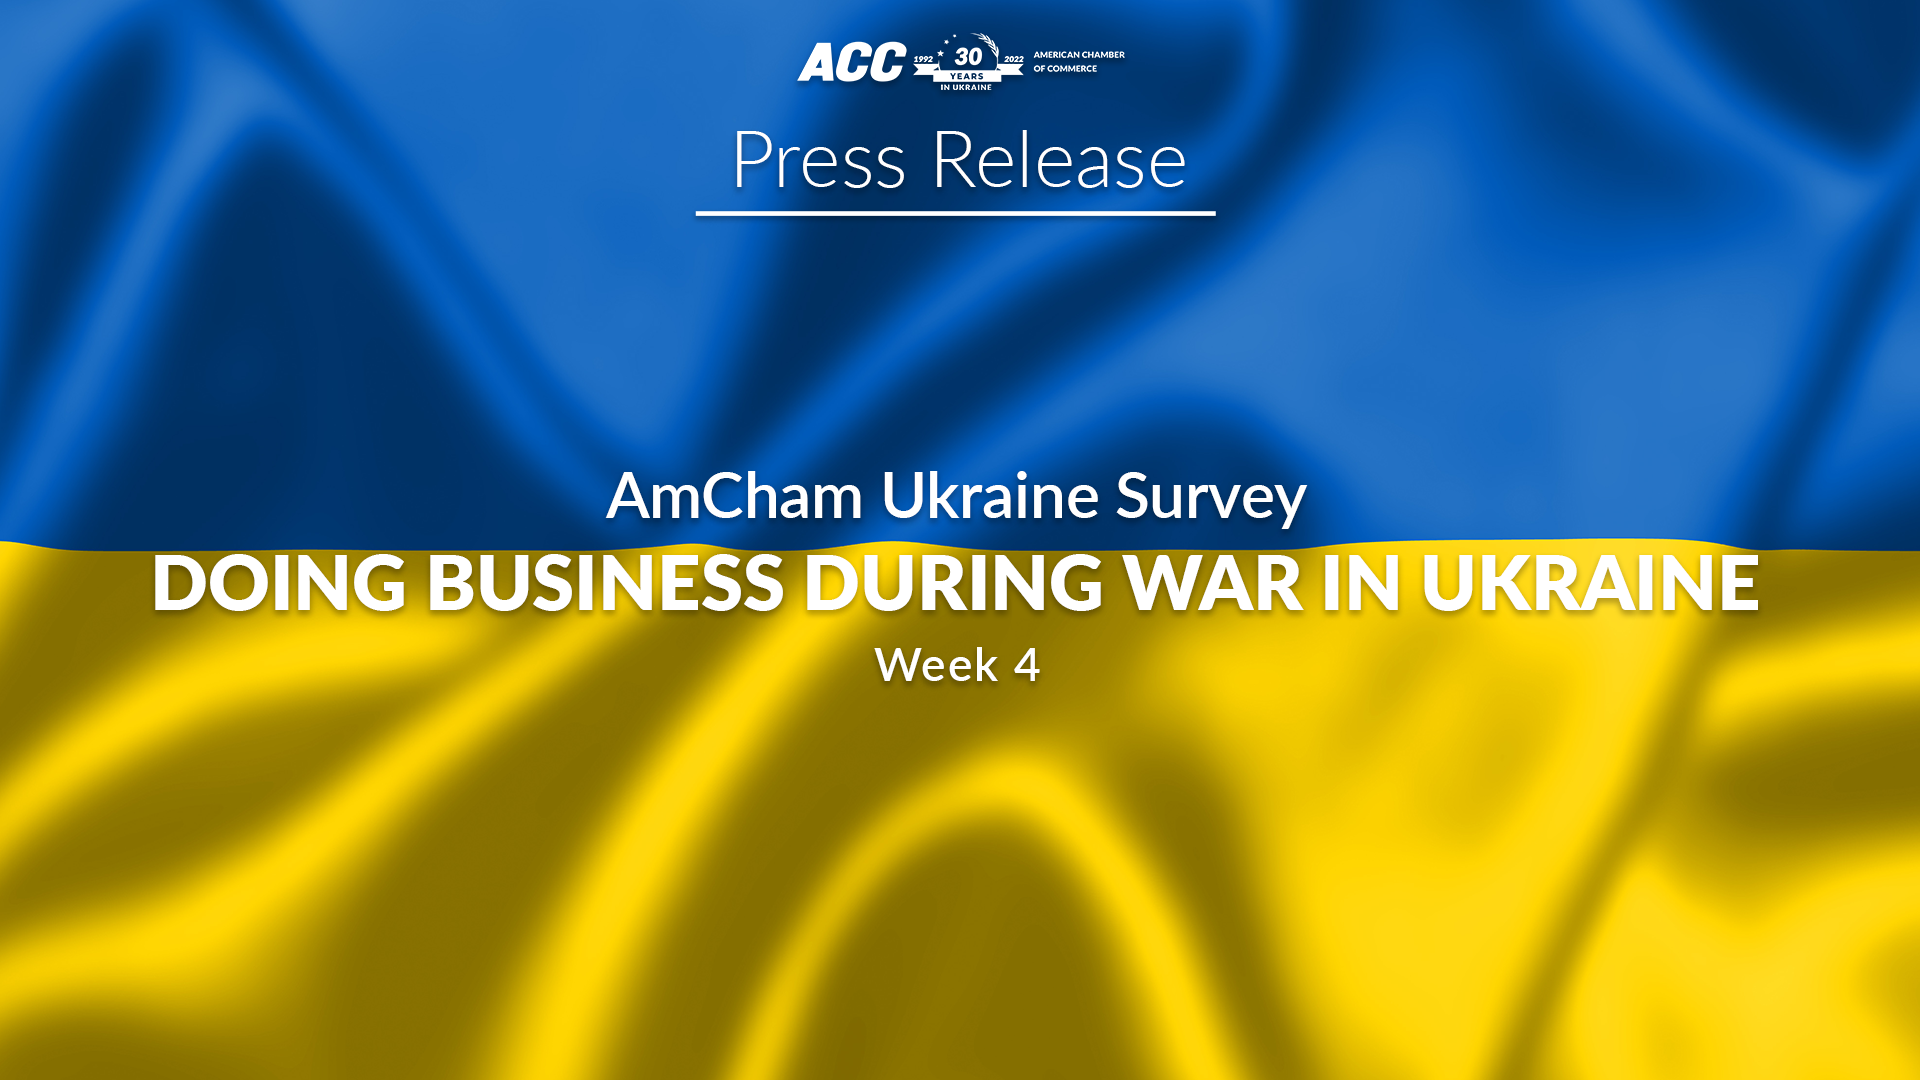 86% of AmCham Ukraine members support a global boycott of companies that have kept their operations open in Russia